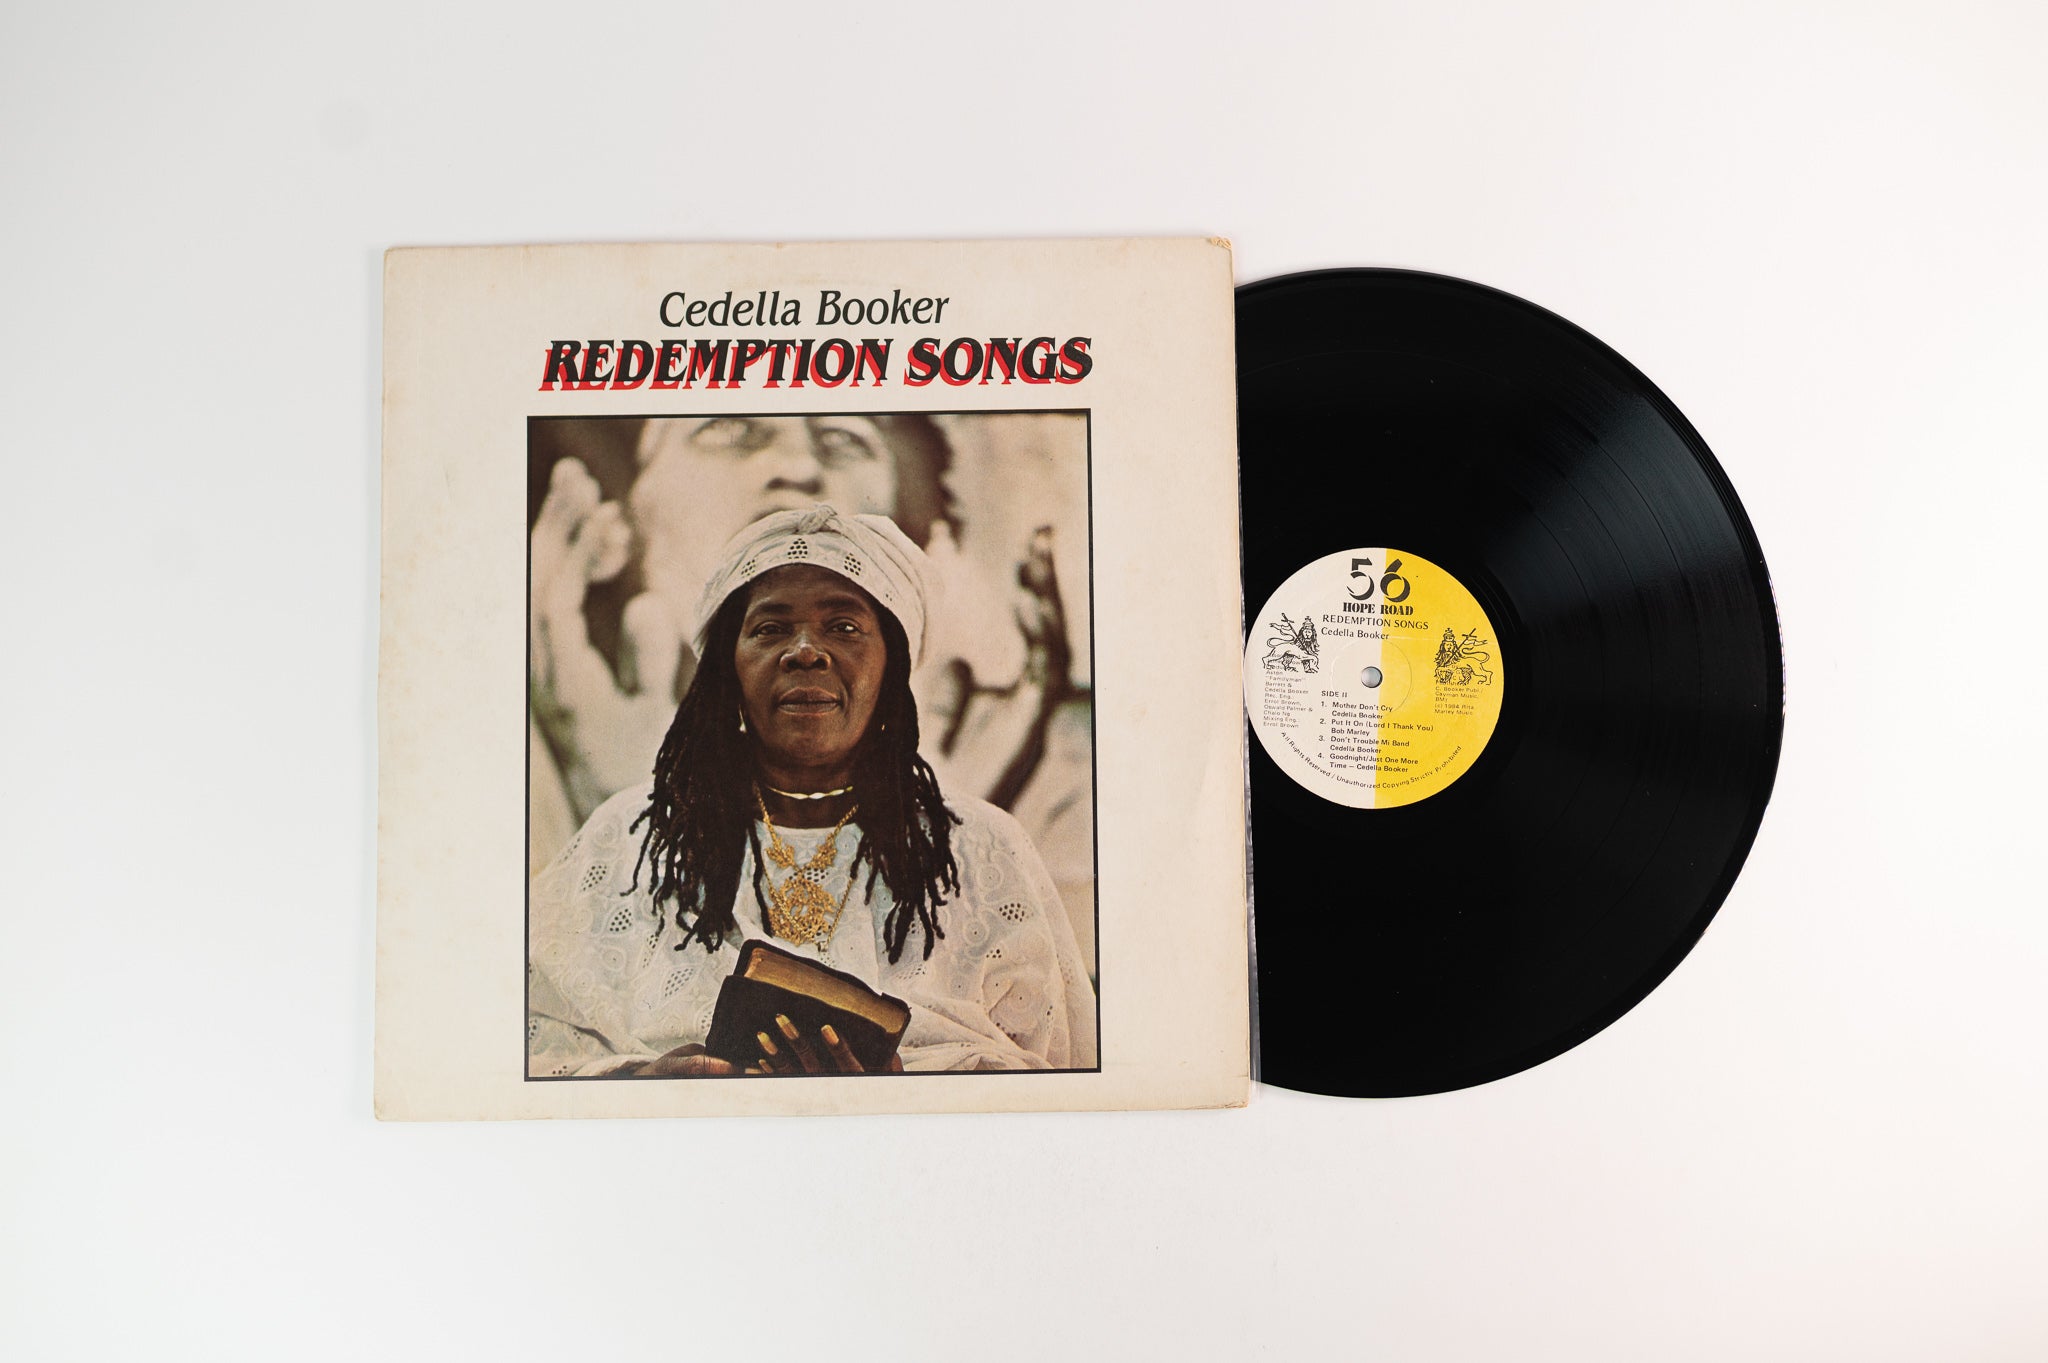 Cedella Marley Booker - Redemption Songs on 56 Hope Road